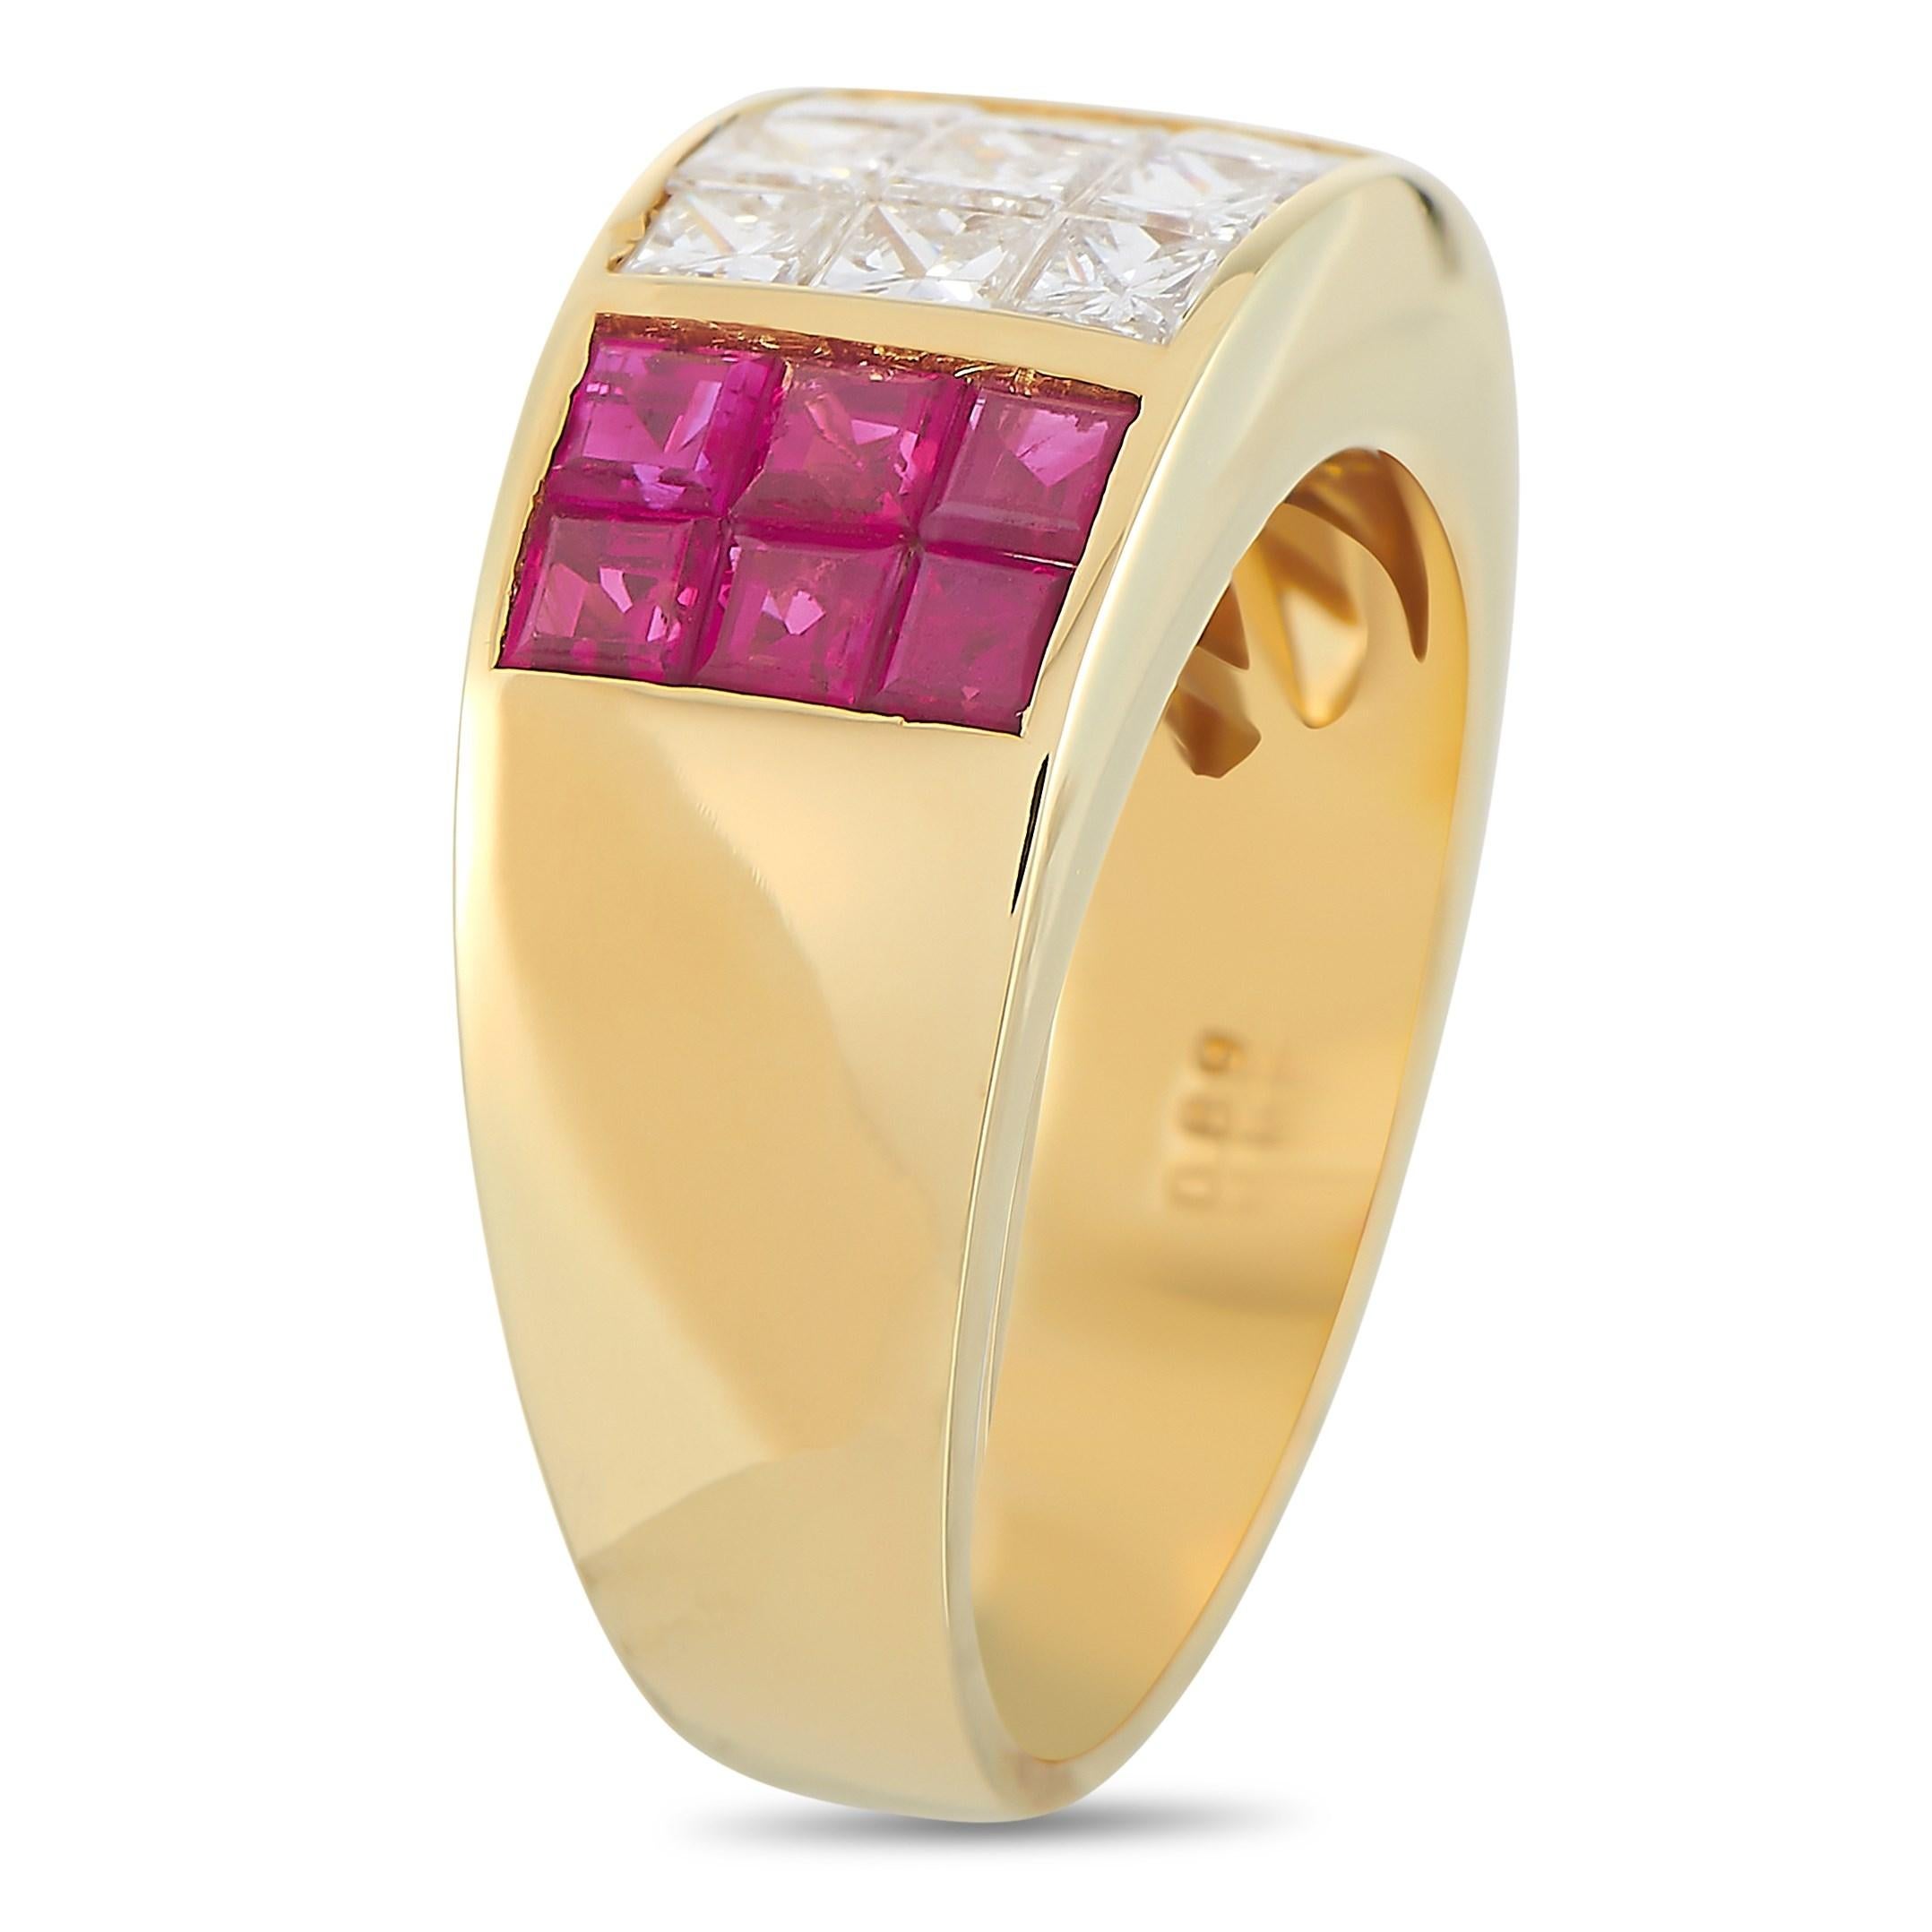 This bold LB Exclusive 18K Yellow Gold 0.89 ct Diamond 1.41 ct Ruby Ring is a statement piece. The band is made with 18K yellow gold and set with three rows of three princess cut diamonds totaling 0.89 carats. The diamonds are flanked on either side